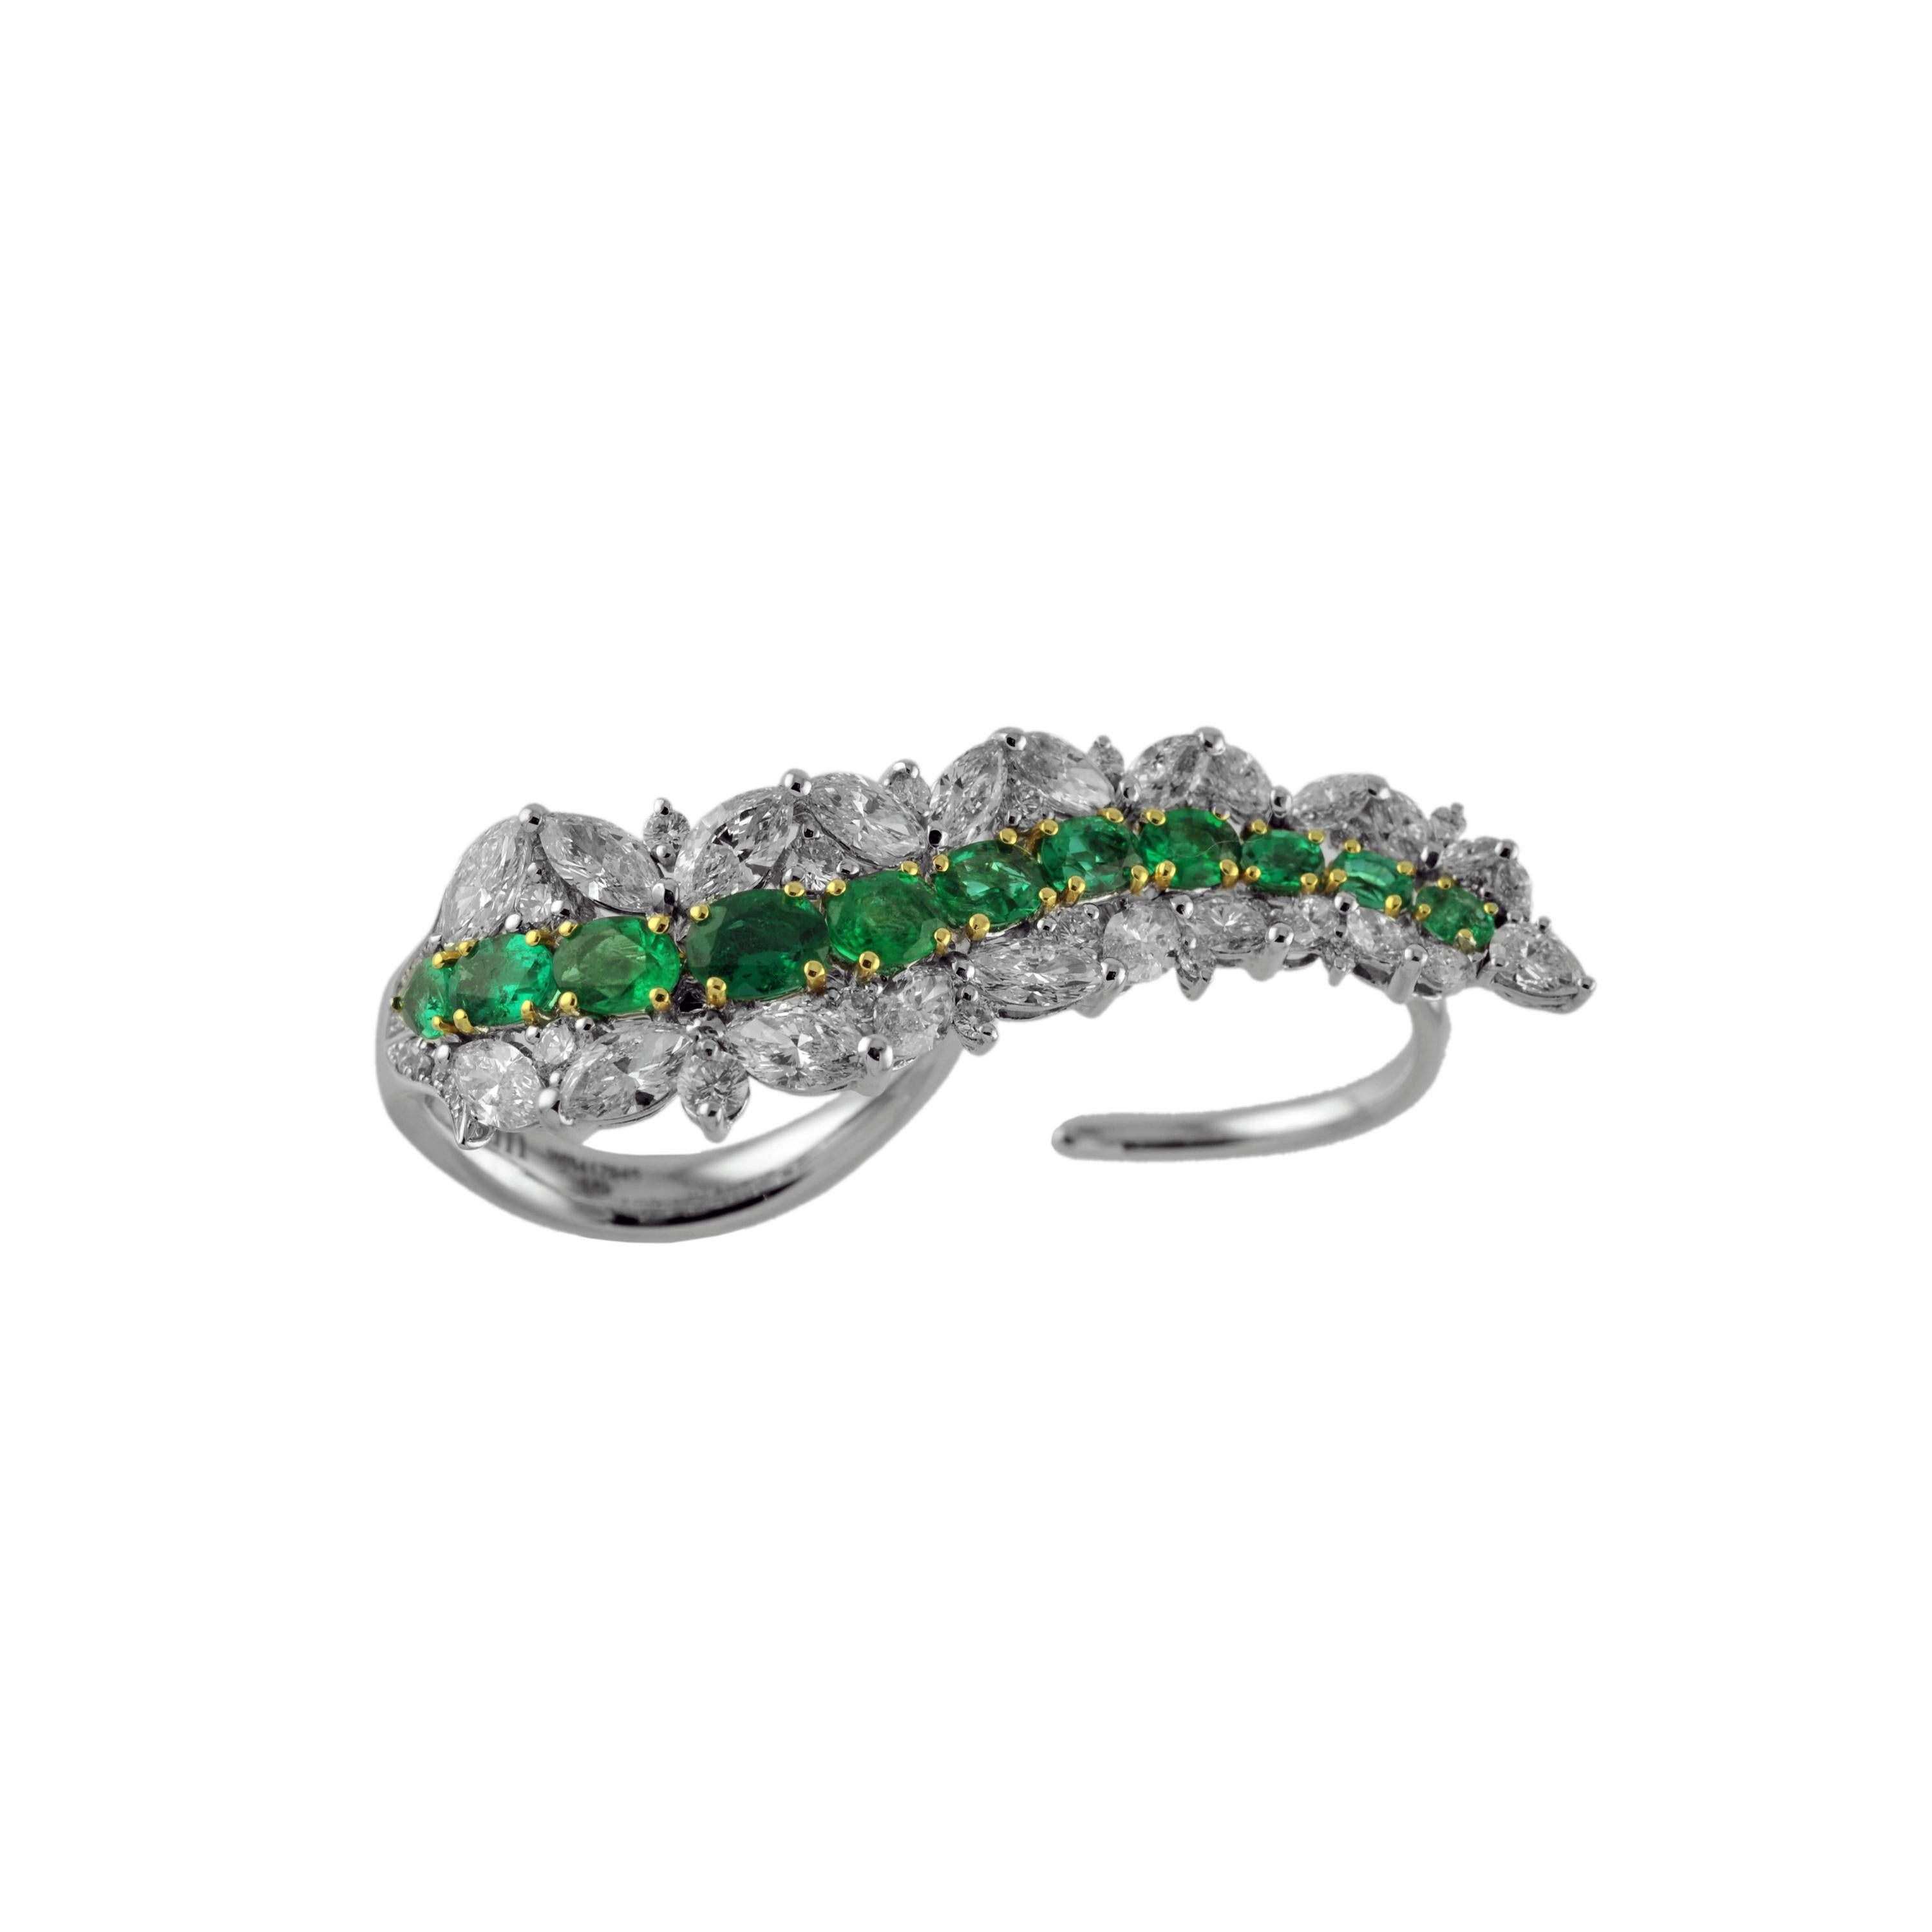 1.78 Carat Emerald with Diamonds 18 Karat White Gold Ring For Sale